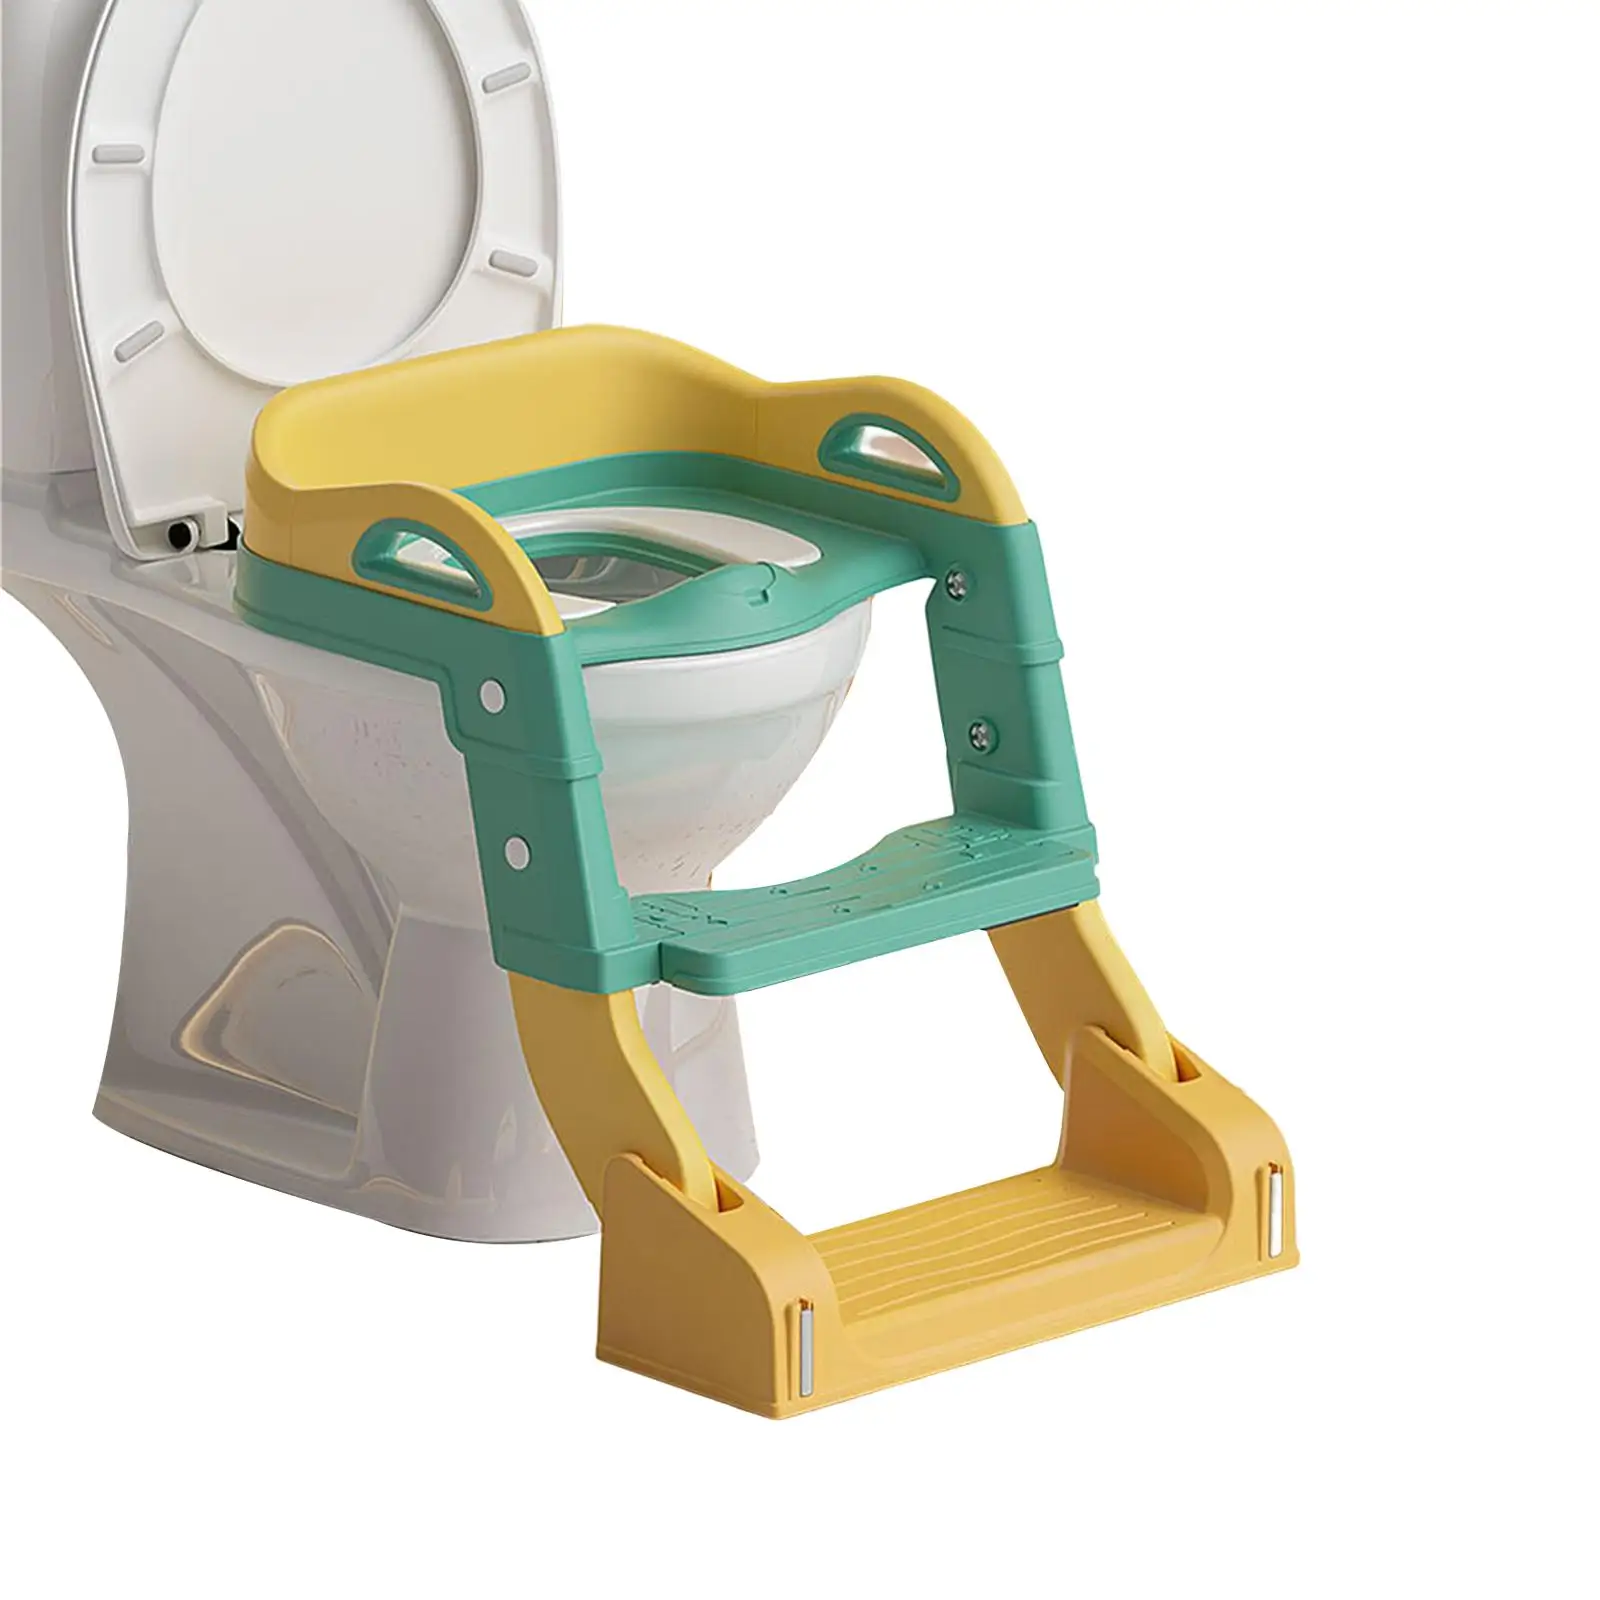 Kids Toilet Training Seat with Step up Ladder Baby Infant Potty Urinal Potty Removable and Washable Soft Seat Cushion Wide Steps